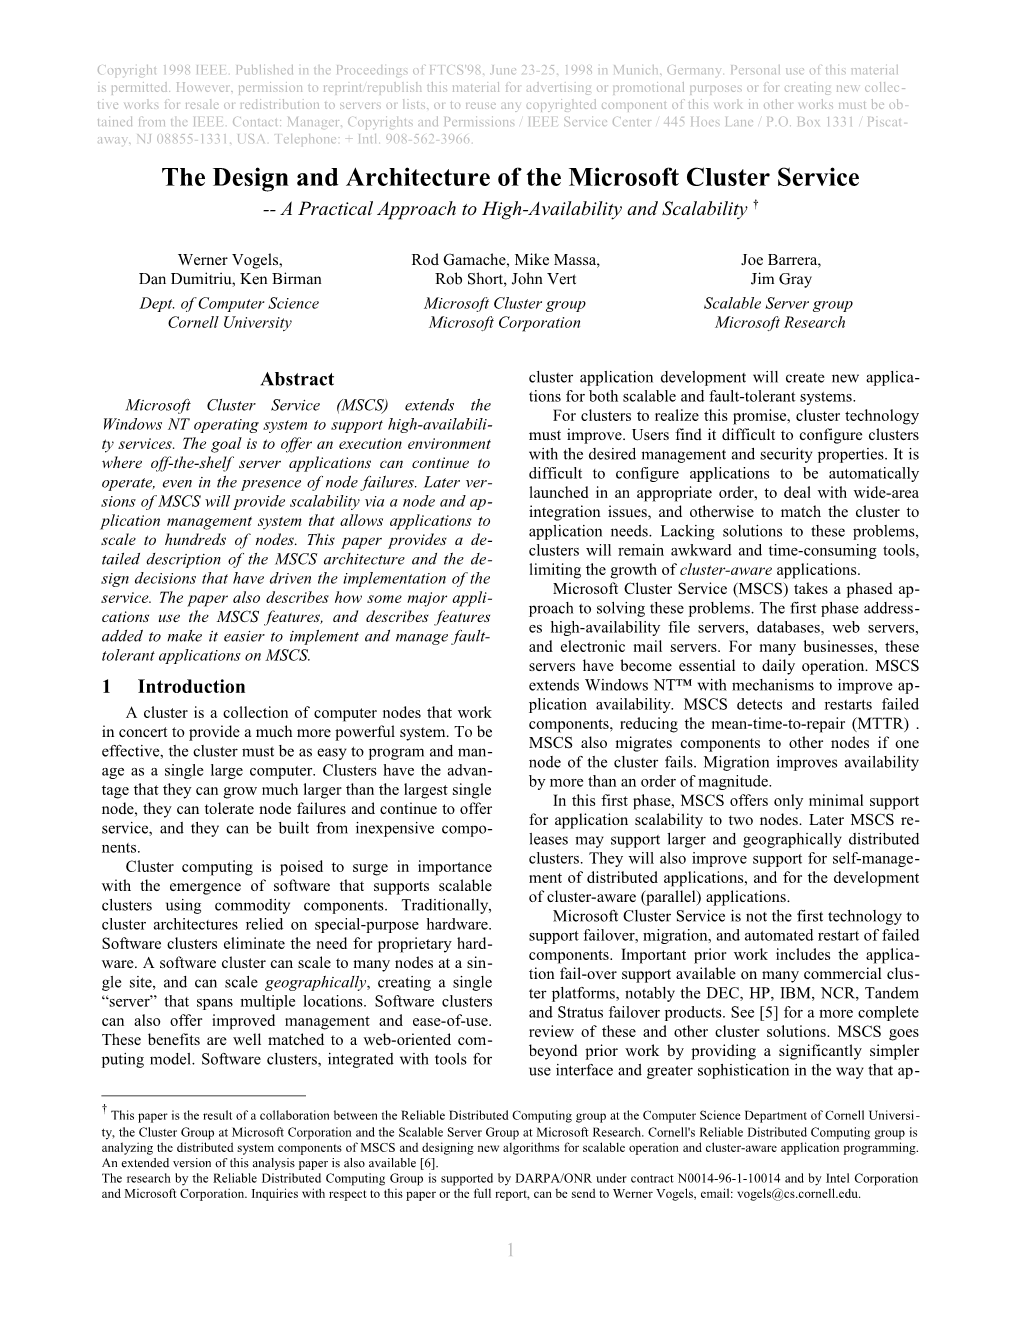 The Design and Architecture of the Microsoft Cluster Service